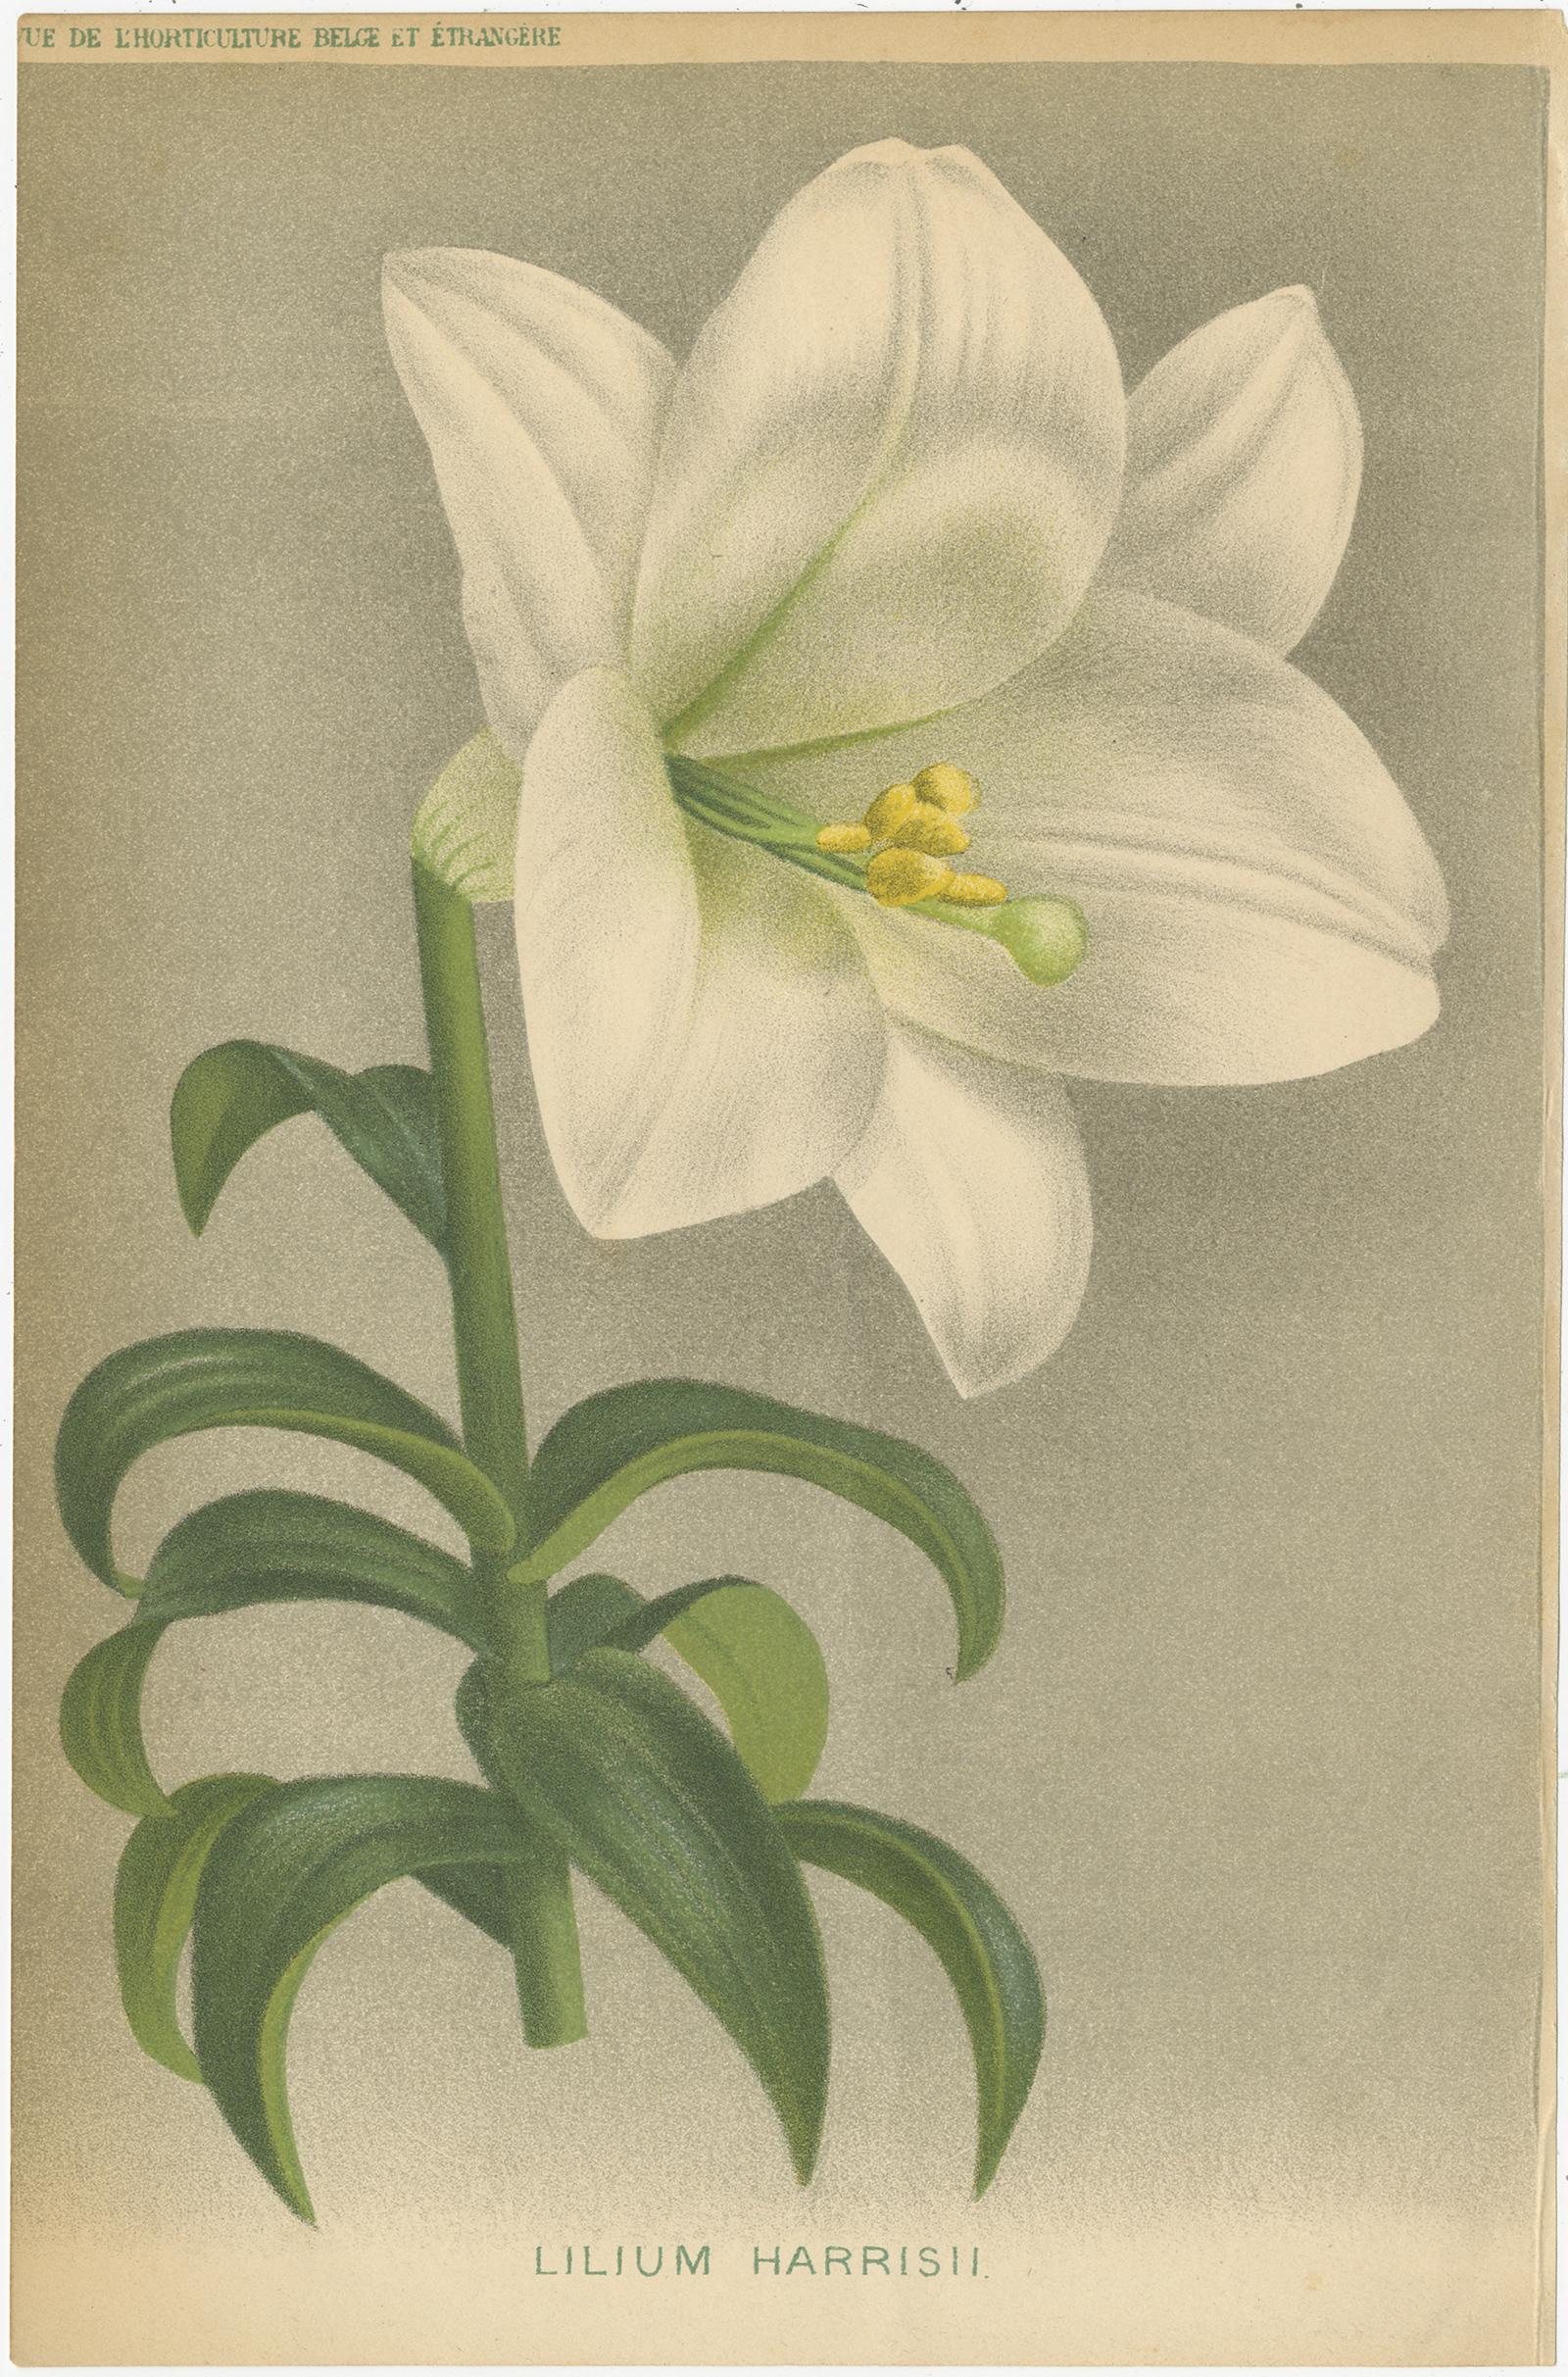 Set of three antique botany prints titled 'Lilium Harrisii - Salvia M. Issanchon - Lilium Auratum'. It shows the easter lily, salvia splendens (scarlet sage) and the golden rayed lily. These prints originate from 'Revue de l'Horticulture Belge et